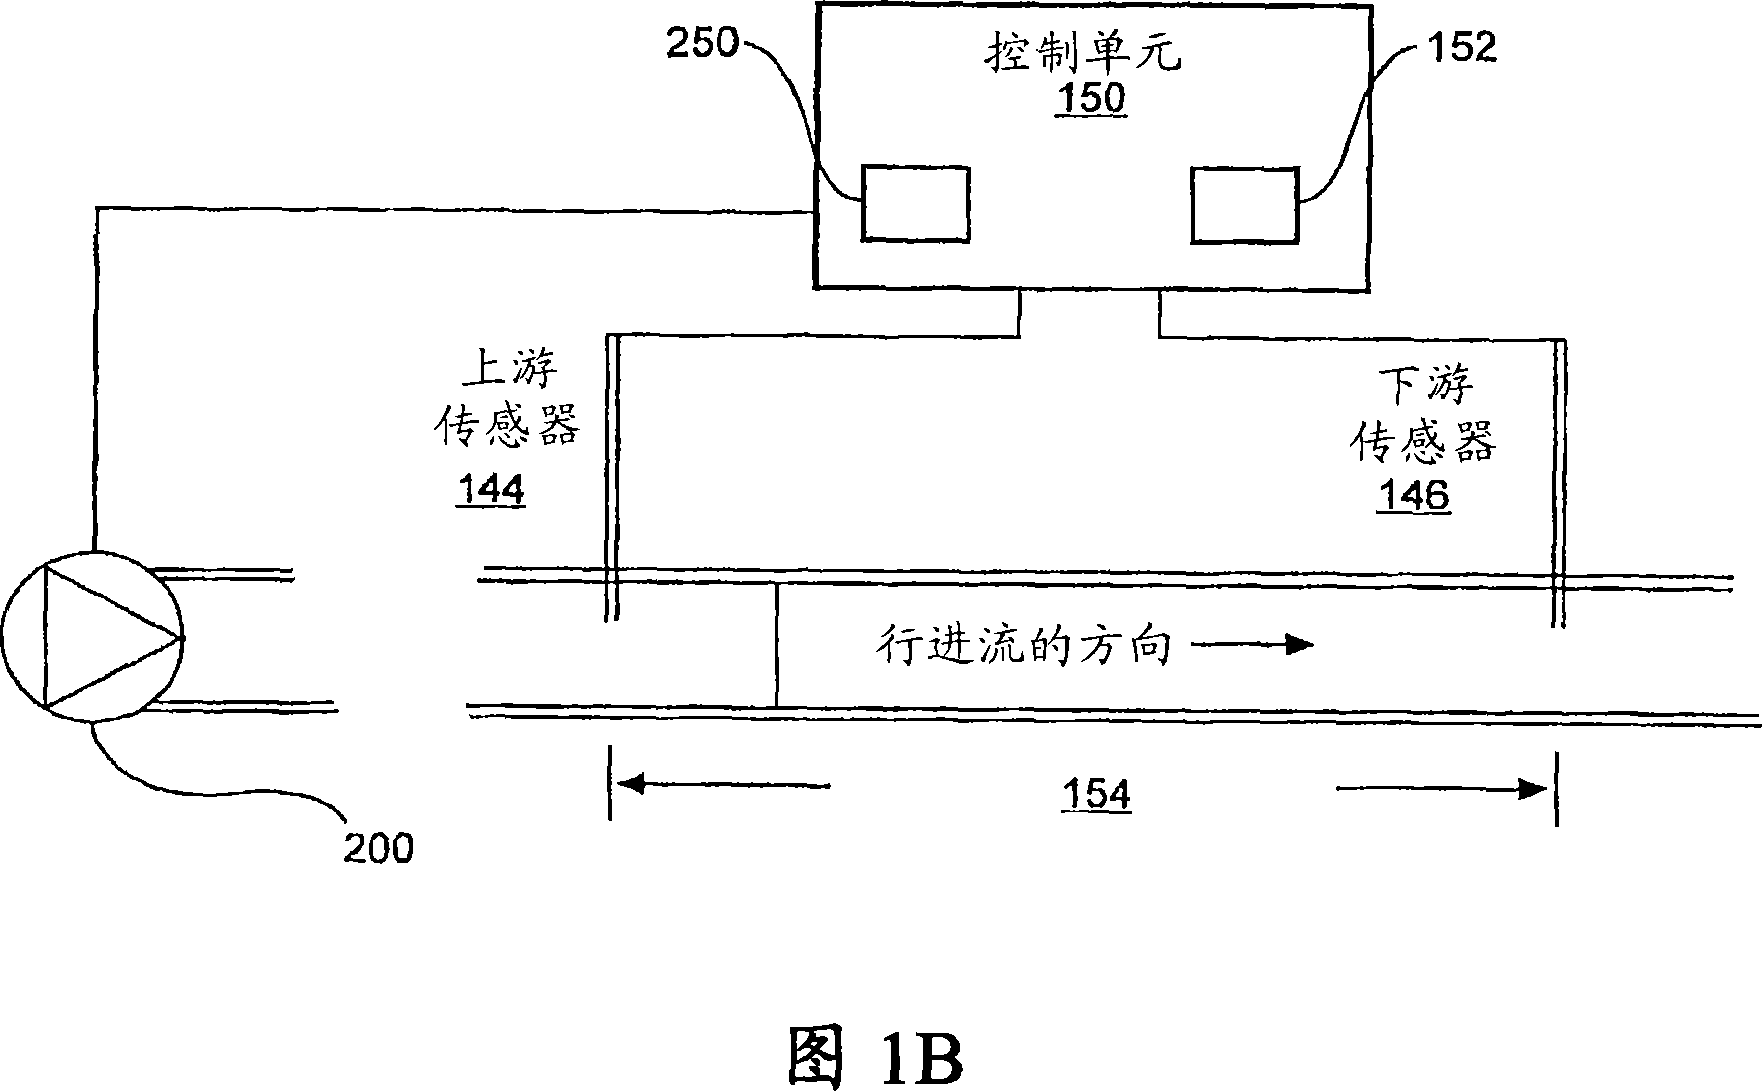 Fluid delivery device with autocalibration